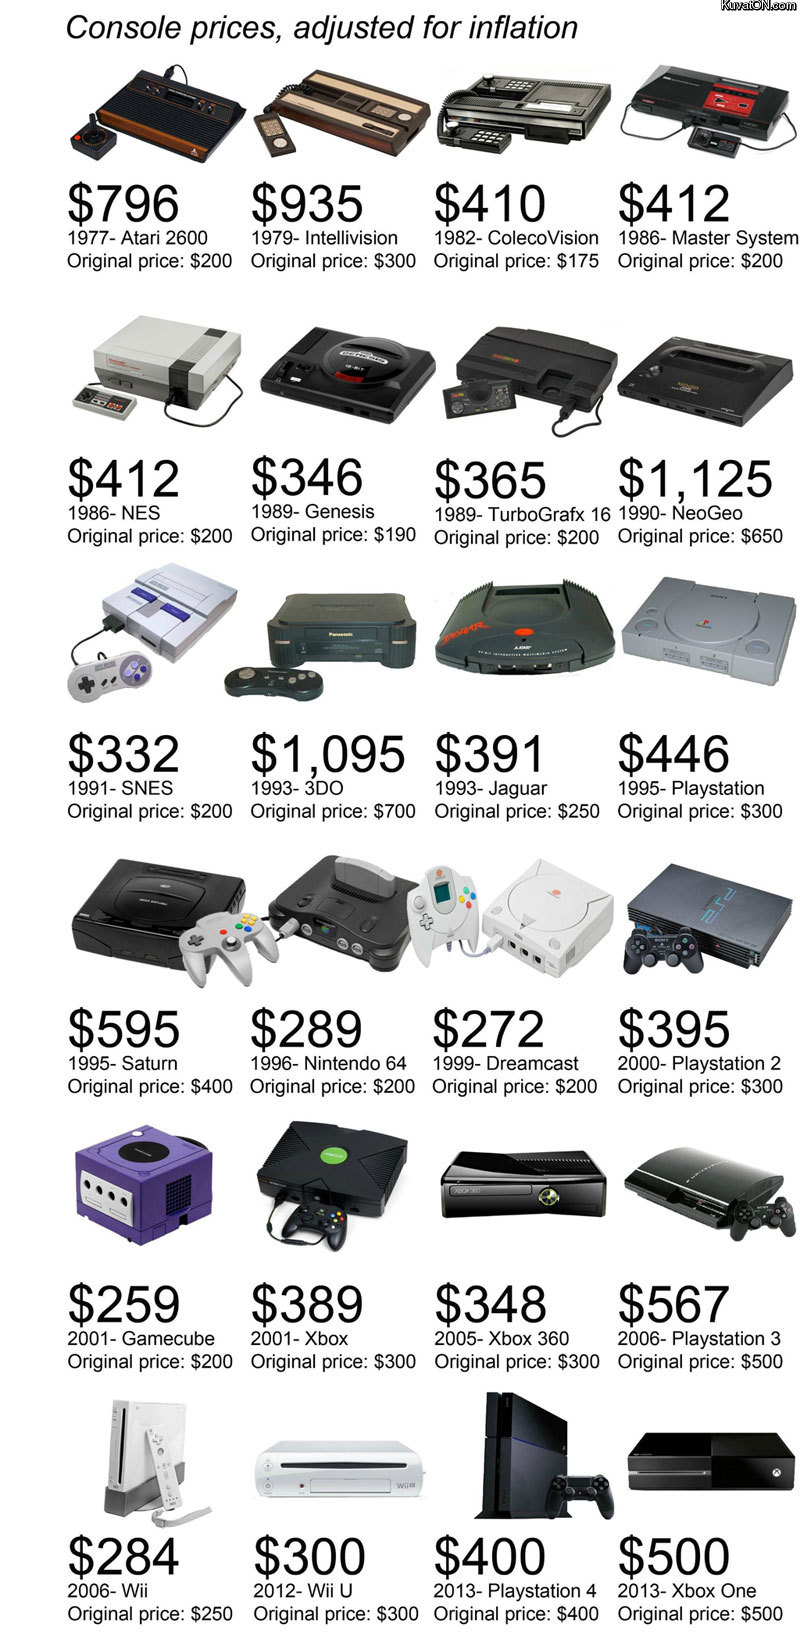 console_prices_adjusted_for_inflation.jpg